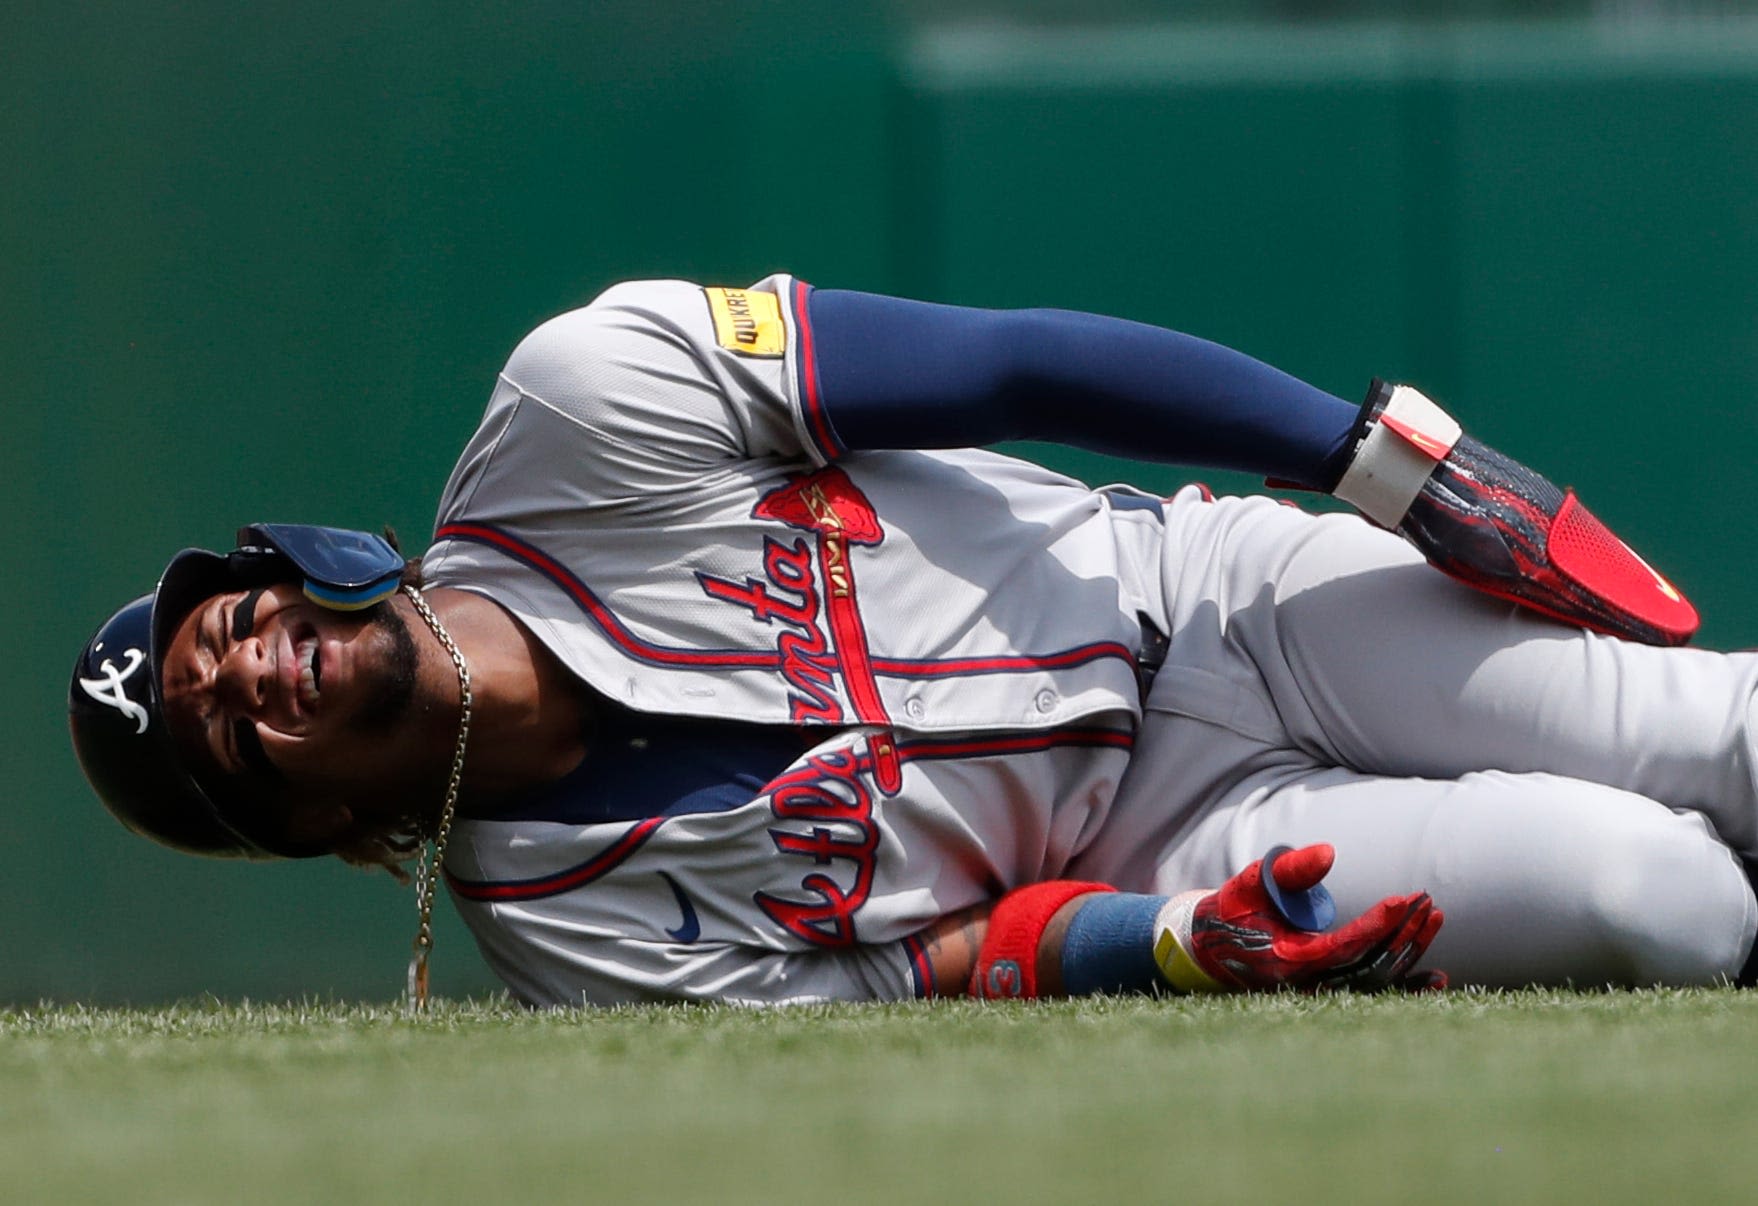 Reigning NL MVP Ronald Acuña Jr. says he'll go on injured list after left knee injury